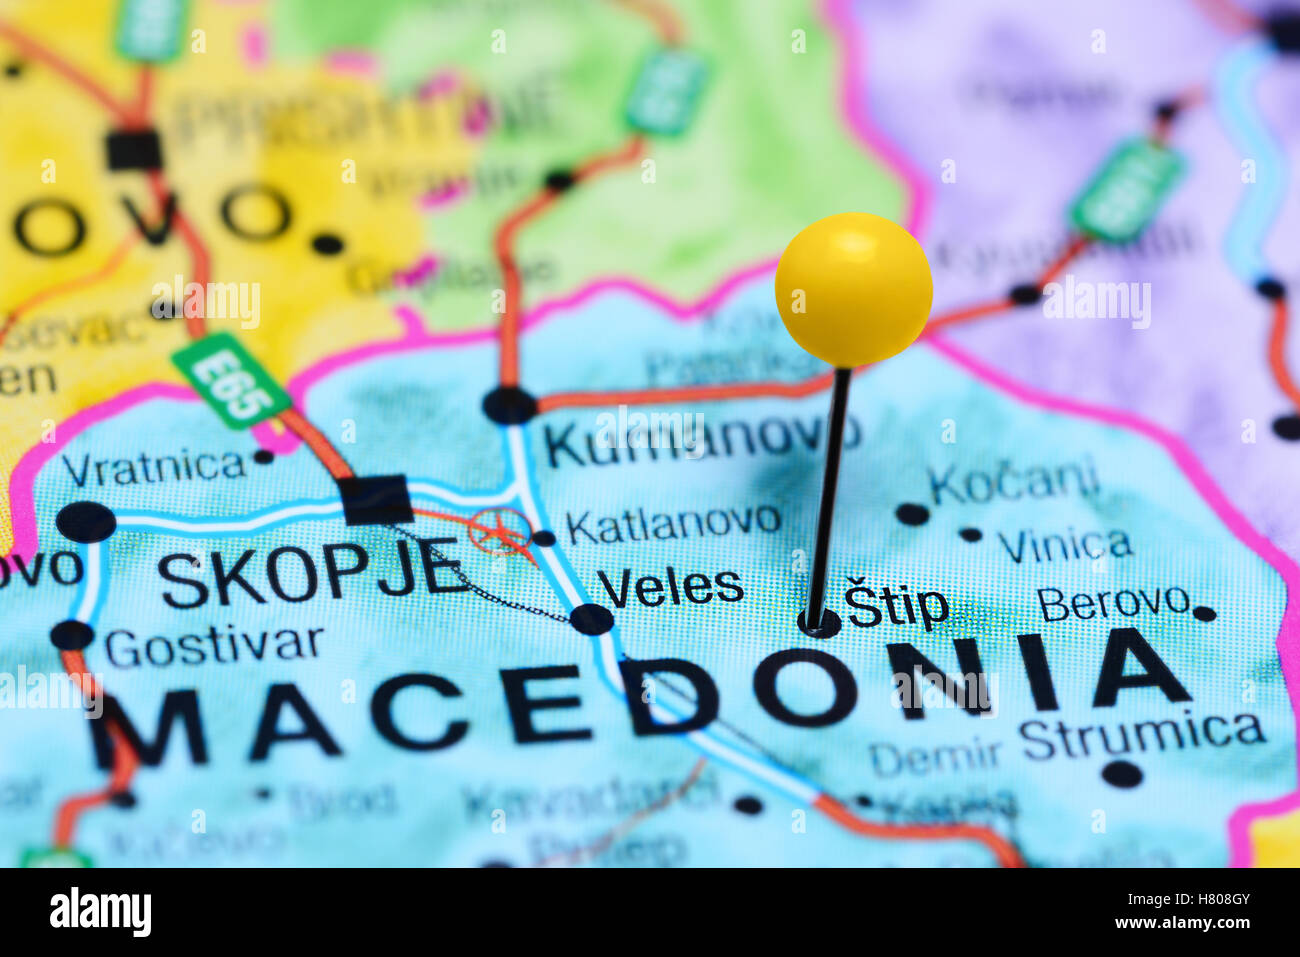 Stip pinned on a map of Macedonia Stock Photo